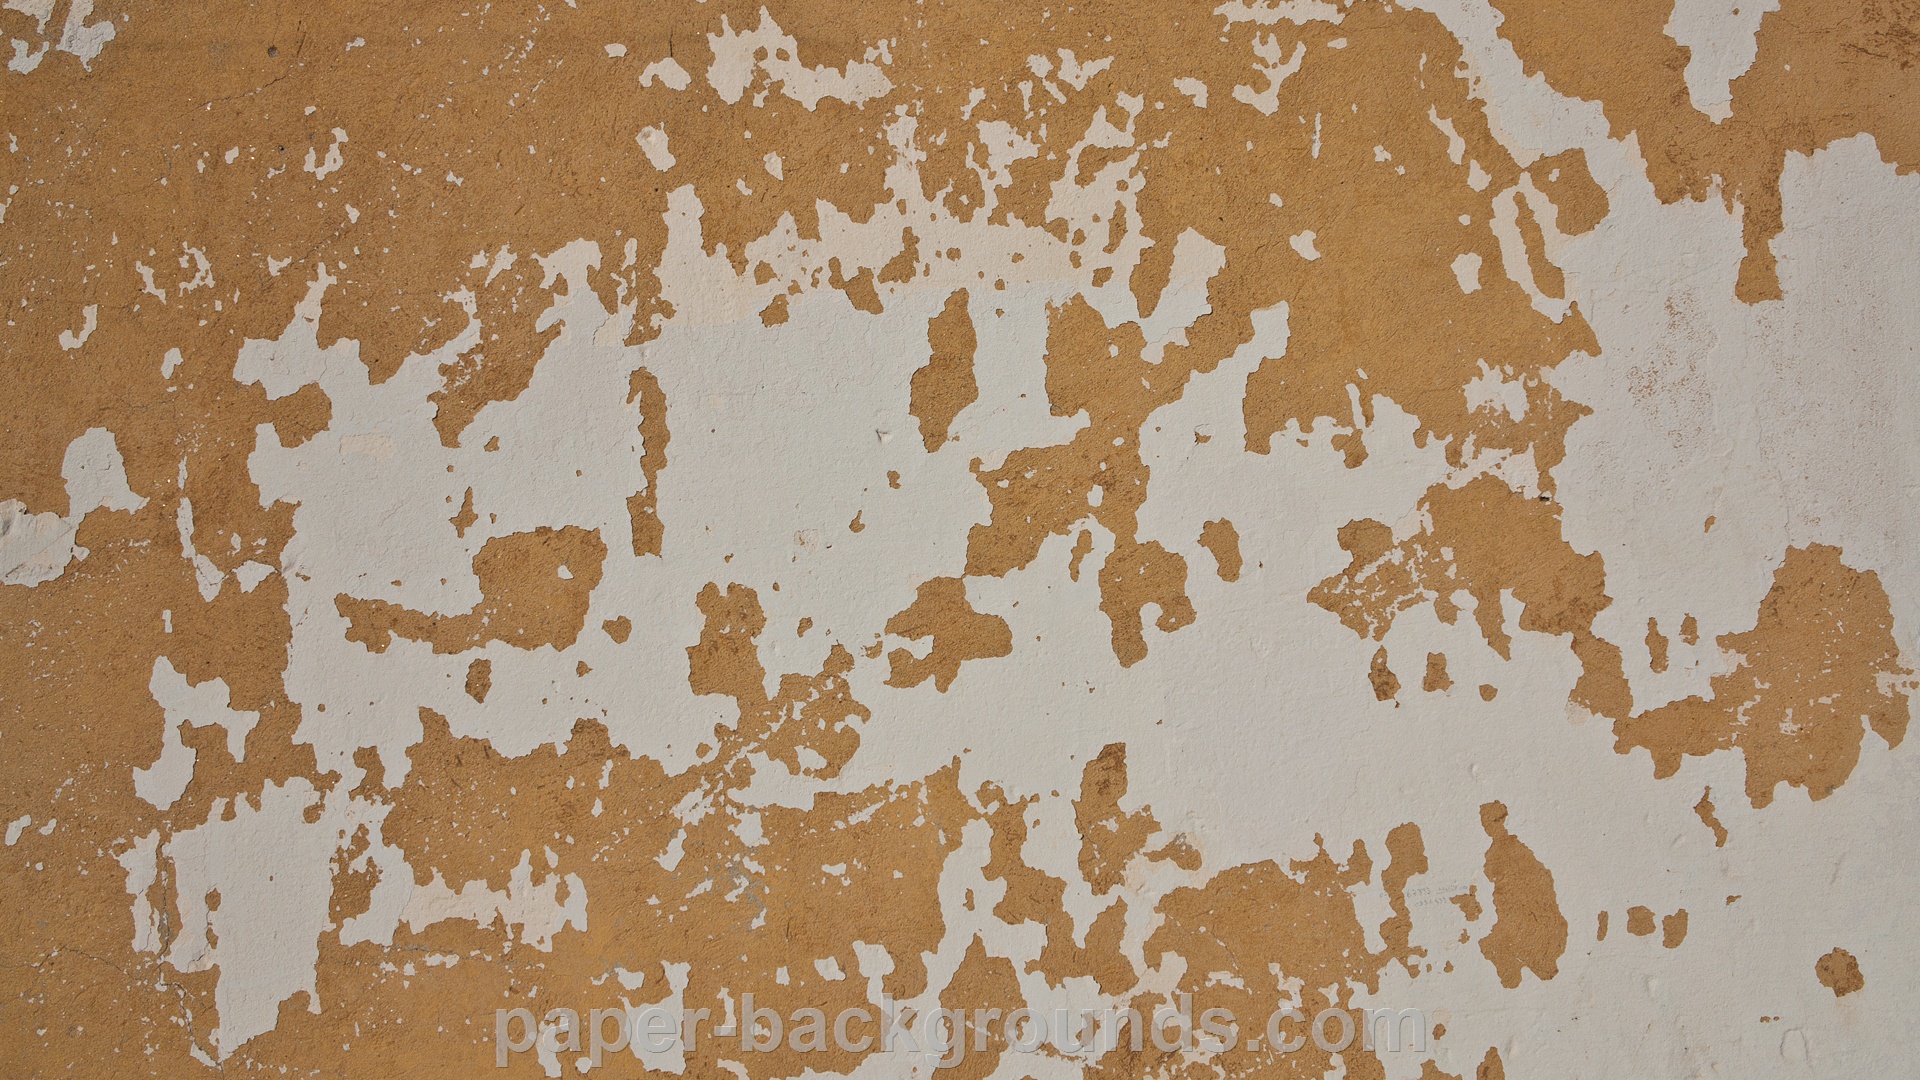 Paper Backgrounds | grunge-yellow-white-wall-paint-texture-hd